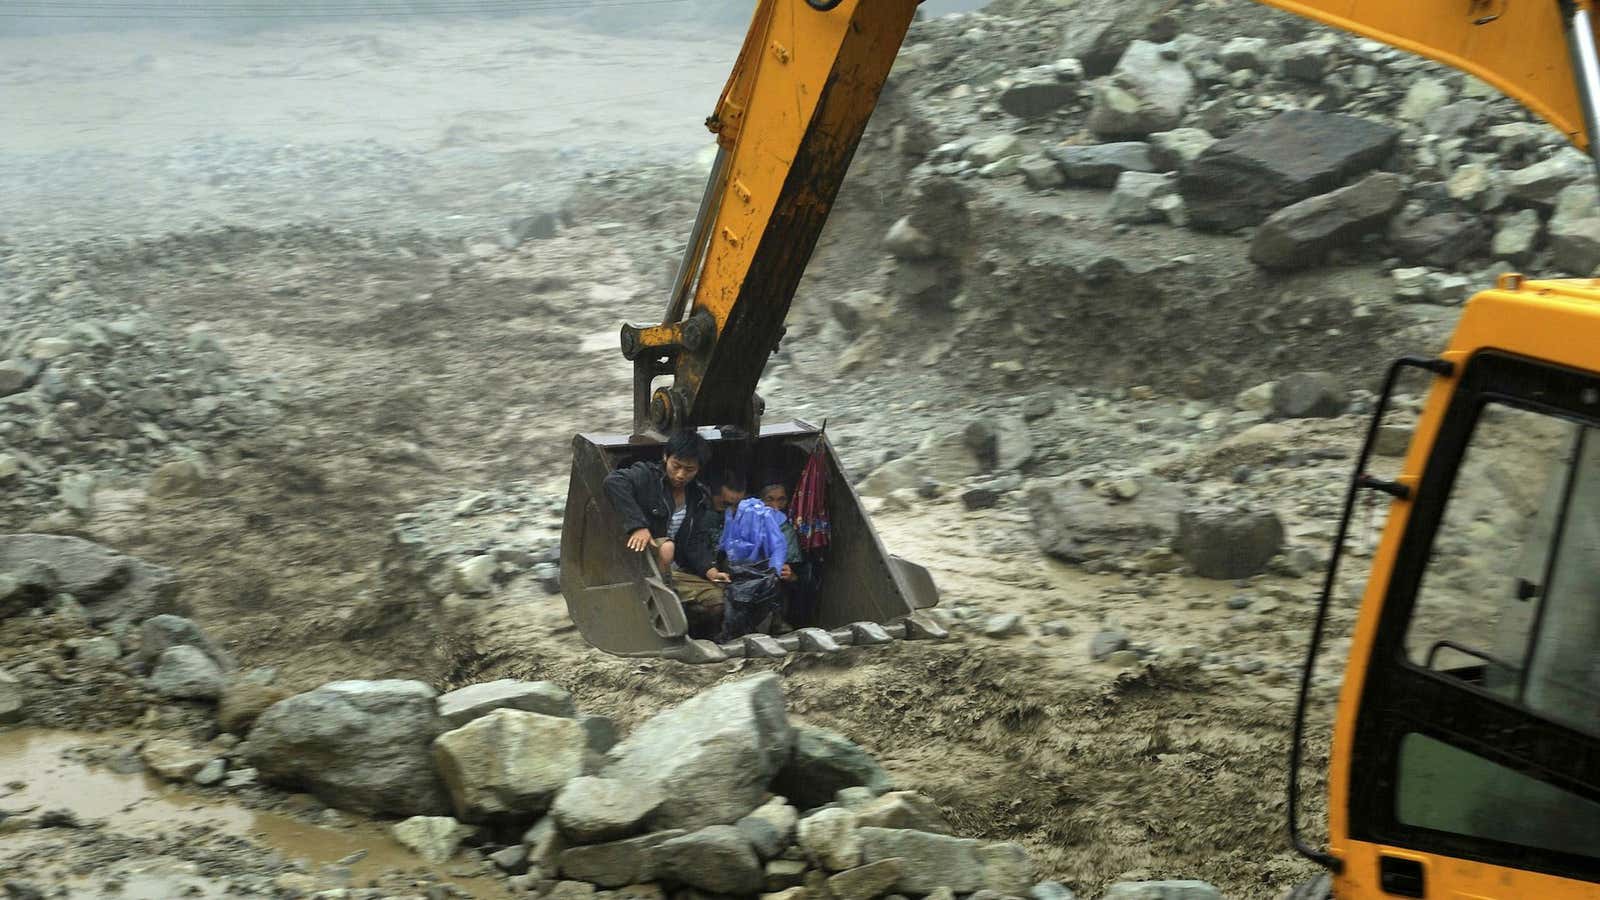 An excavator moves villagers away from a flooded area in Sichuan province in July, 2013.